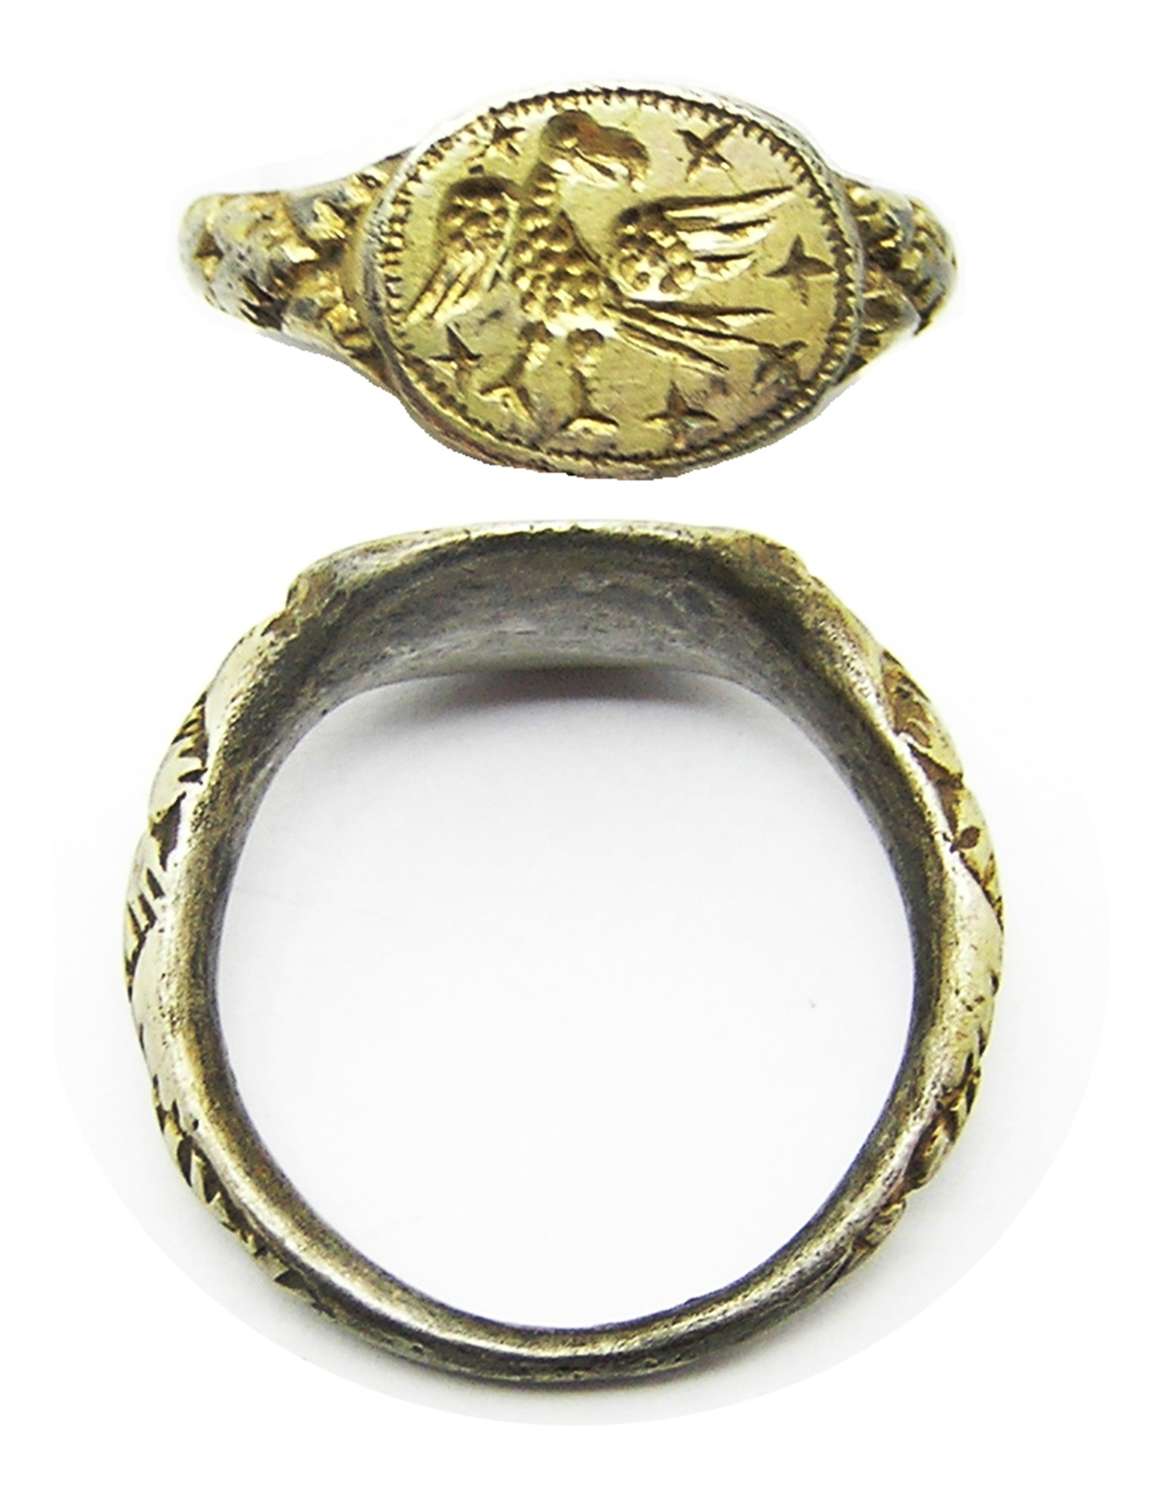 Medieval silver-gilt signet ring of an Eagle